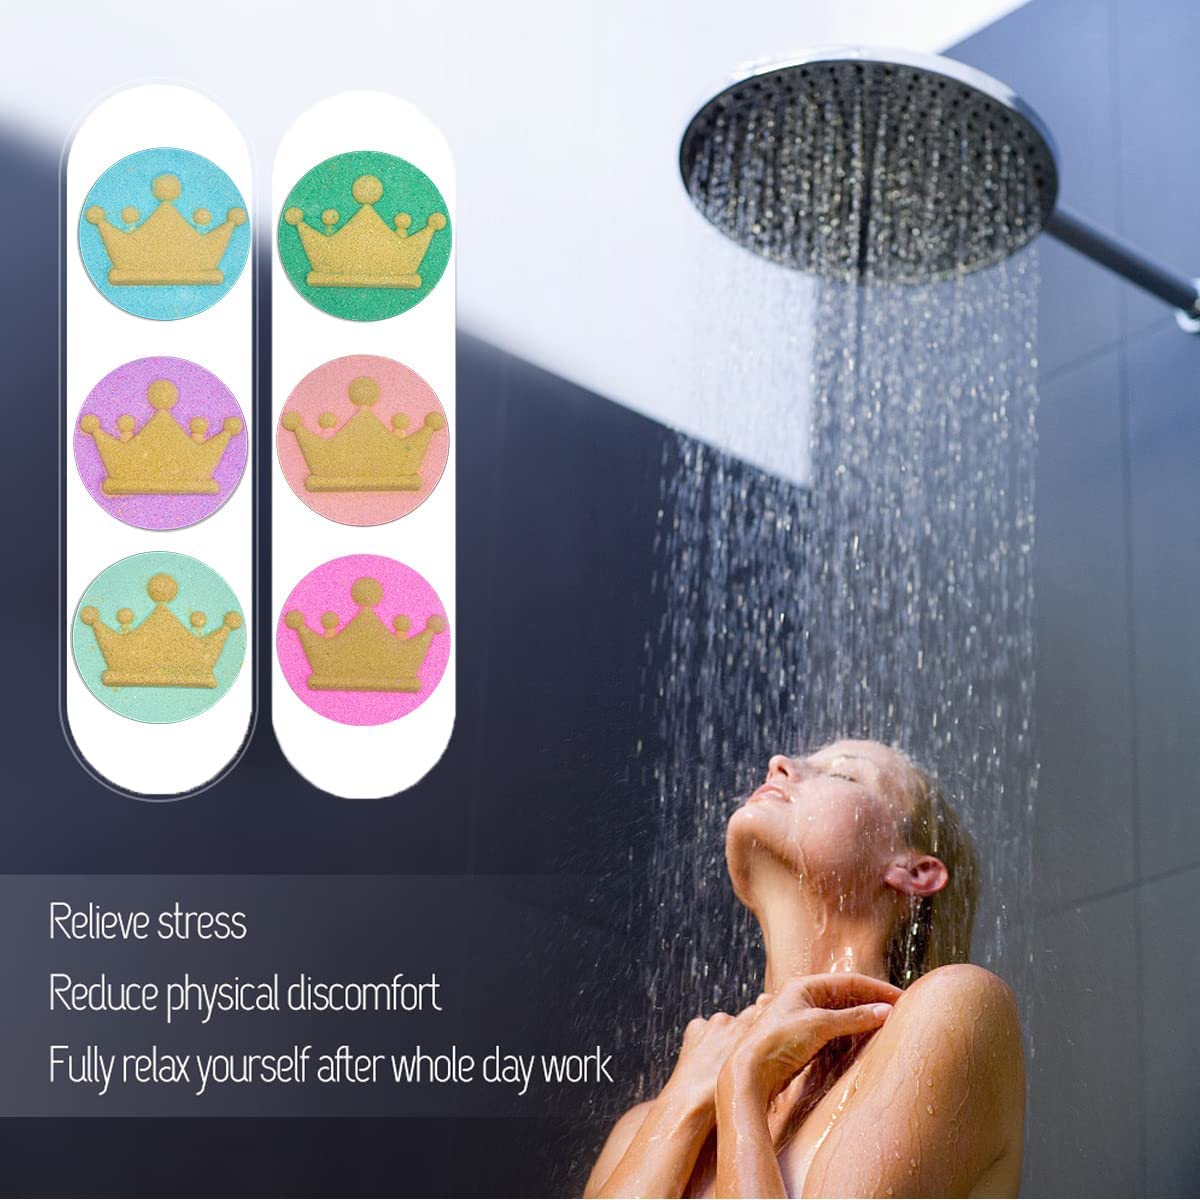 Shower Steamers Aromatherapy (Pack of 12) Gift for Mom Shower Tablets with Essential Oil Shower Fizzy Shower Bombs Spa Self Care Birthday Gift for Women,Men Crown Shape